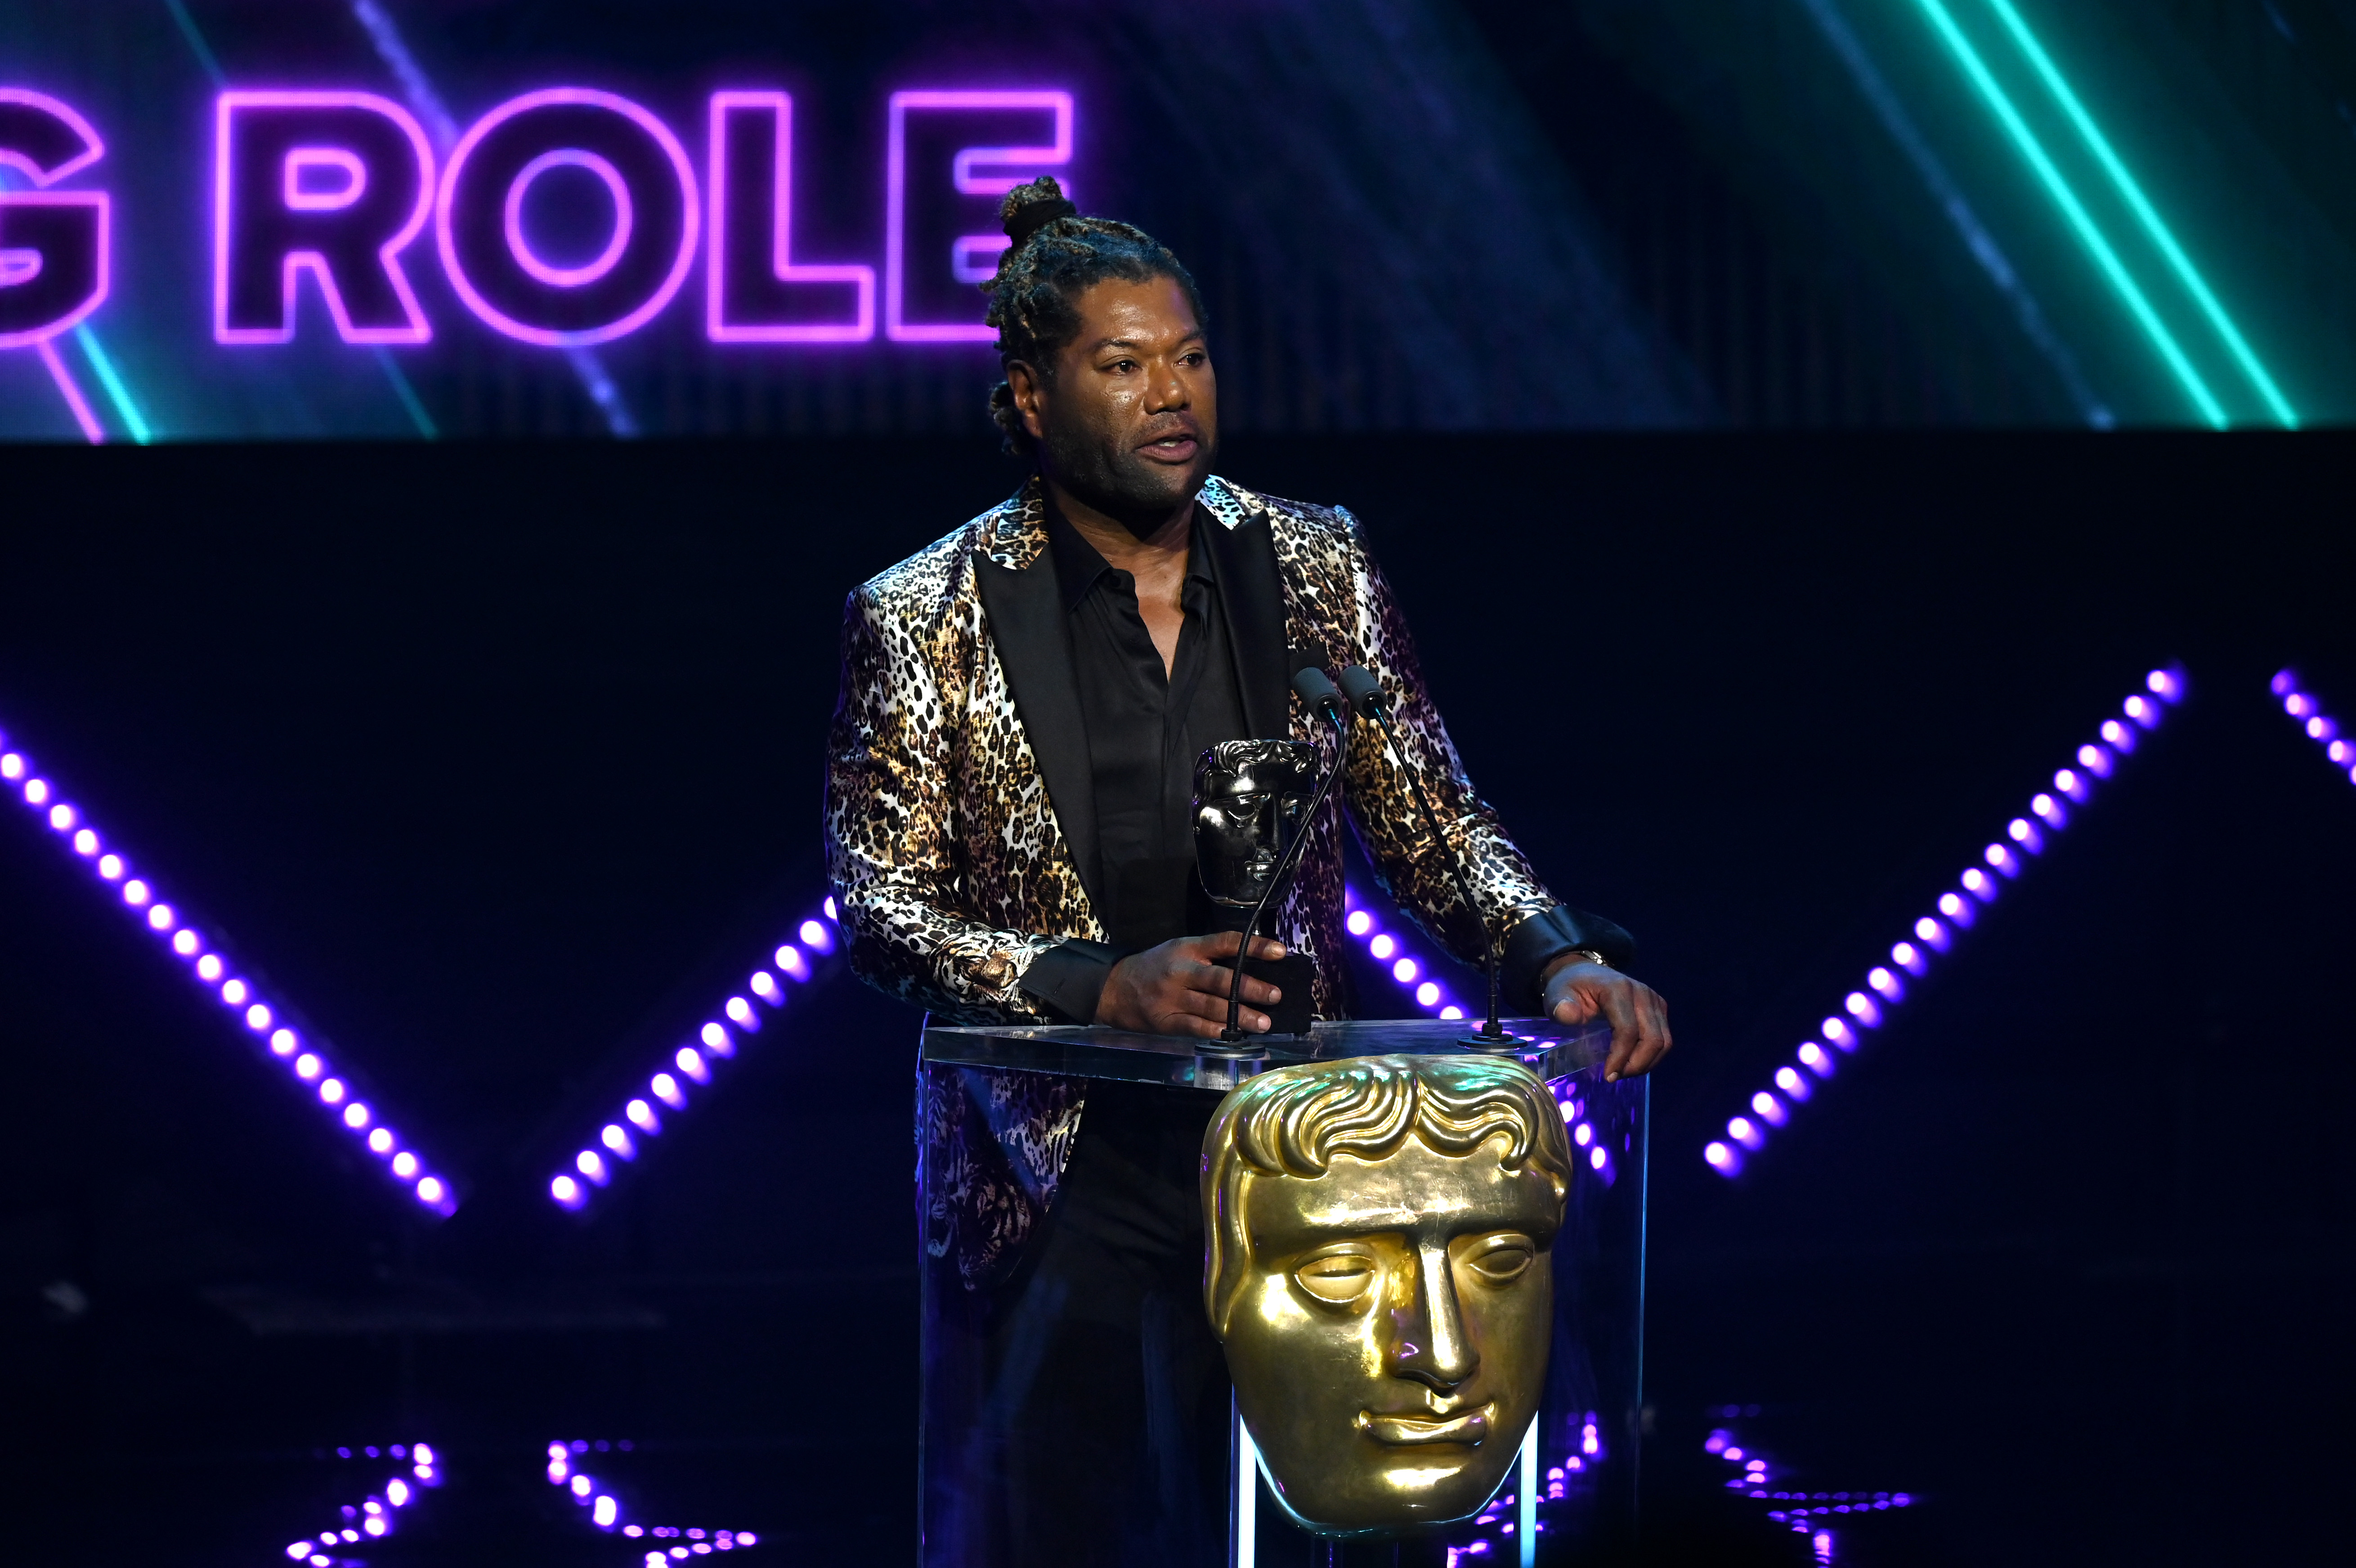 Christopher Judge's Call of Duty campaign joke didn't land with some  developers